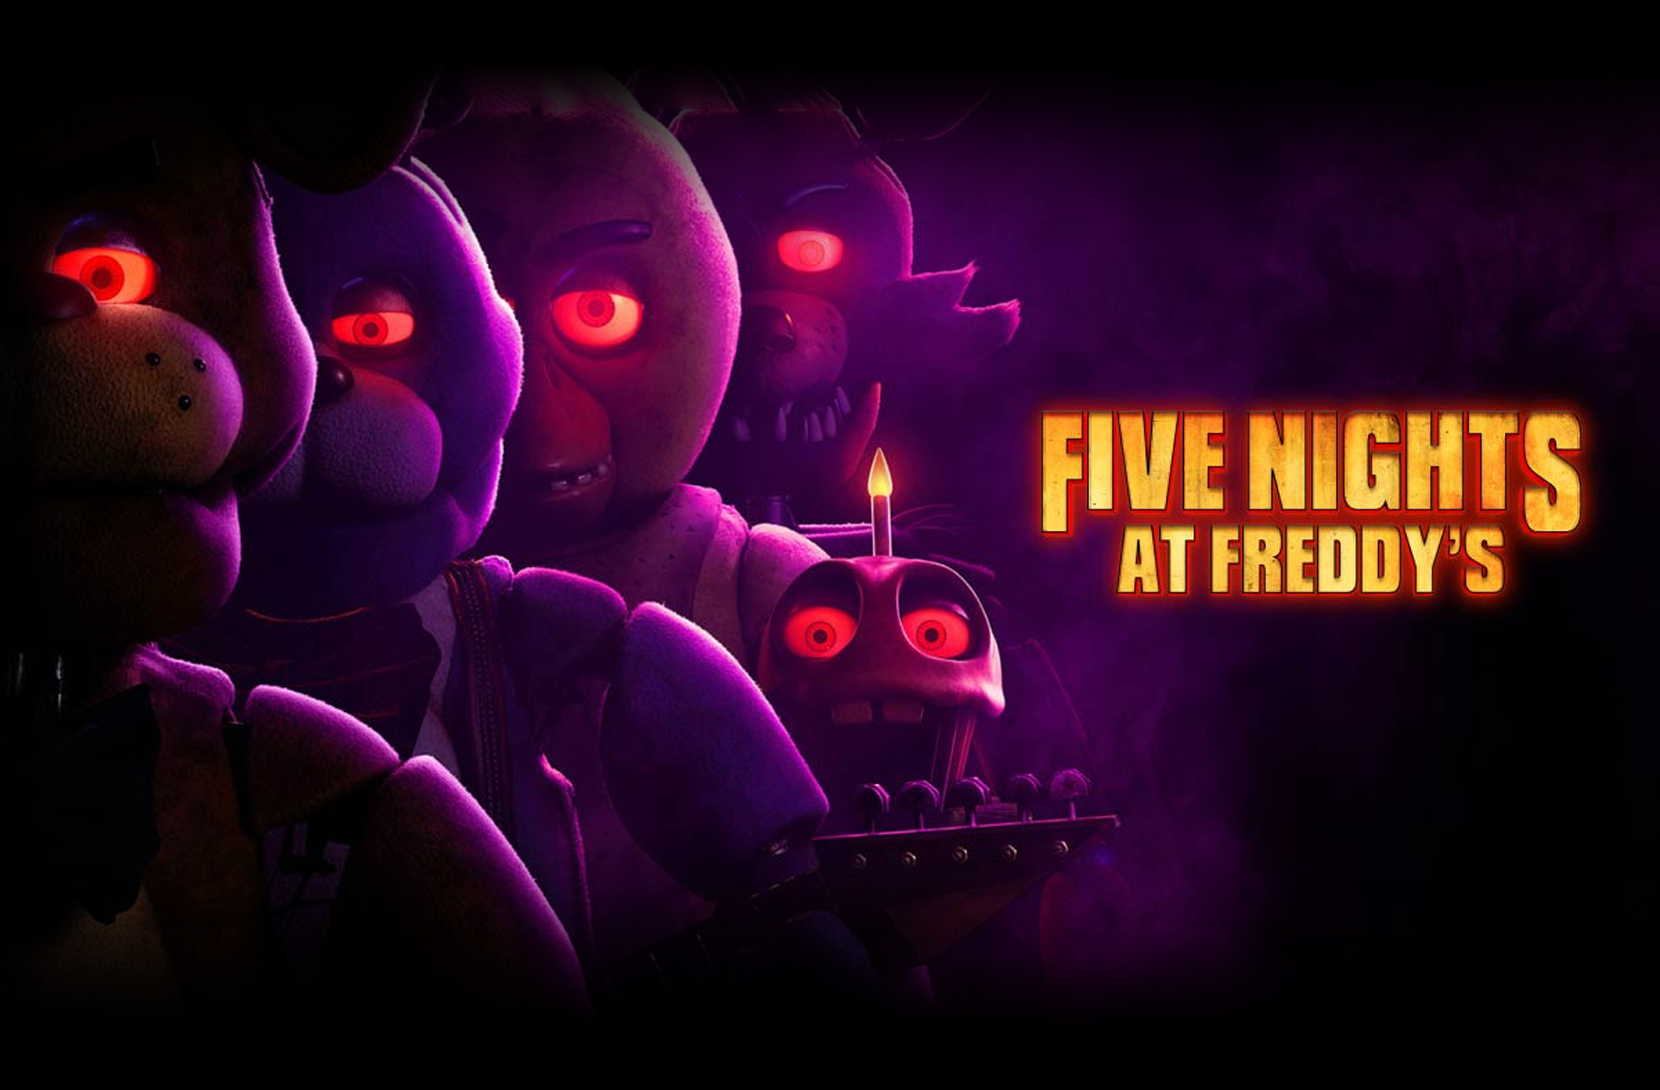 Five Nights at Freddy's 4' Teaser Features Jack-O-Freddy